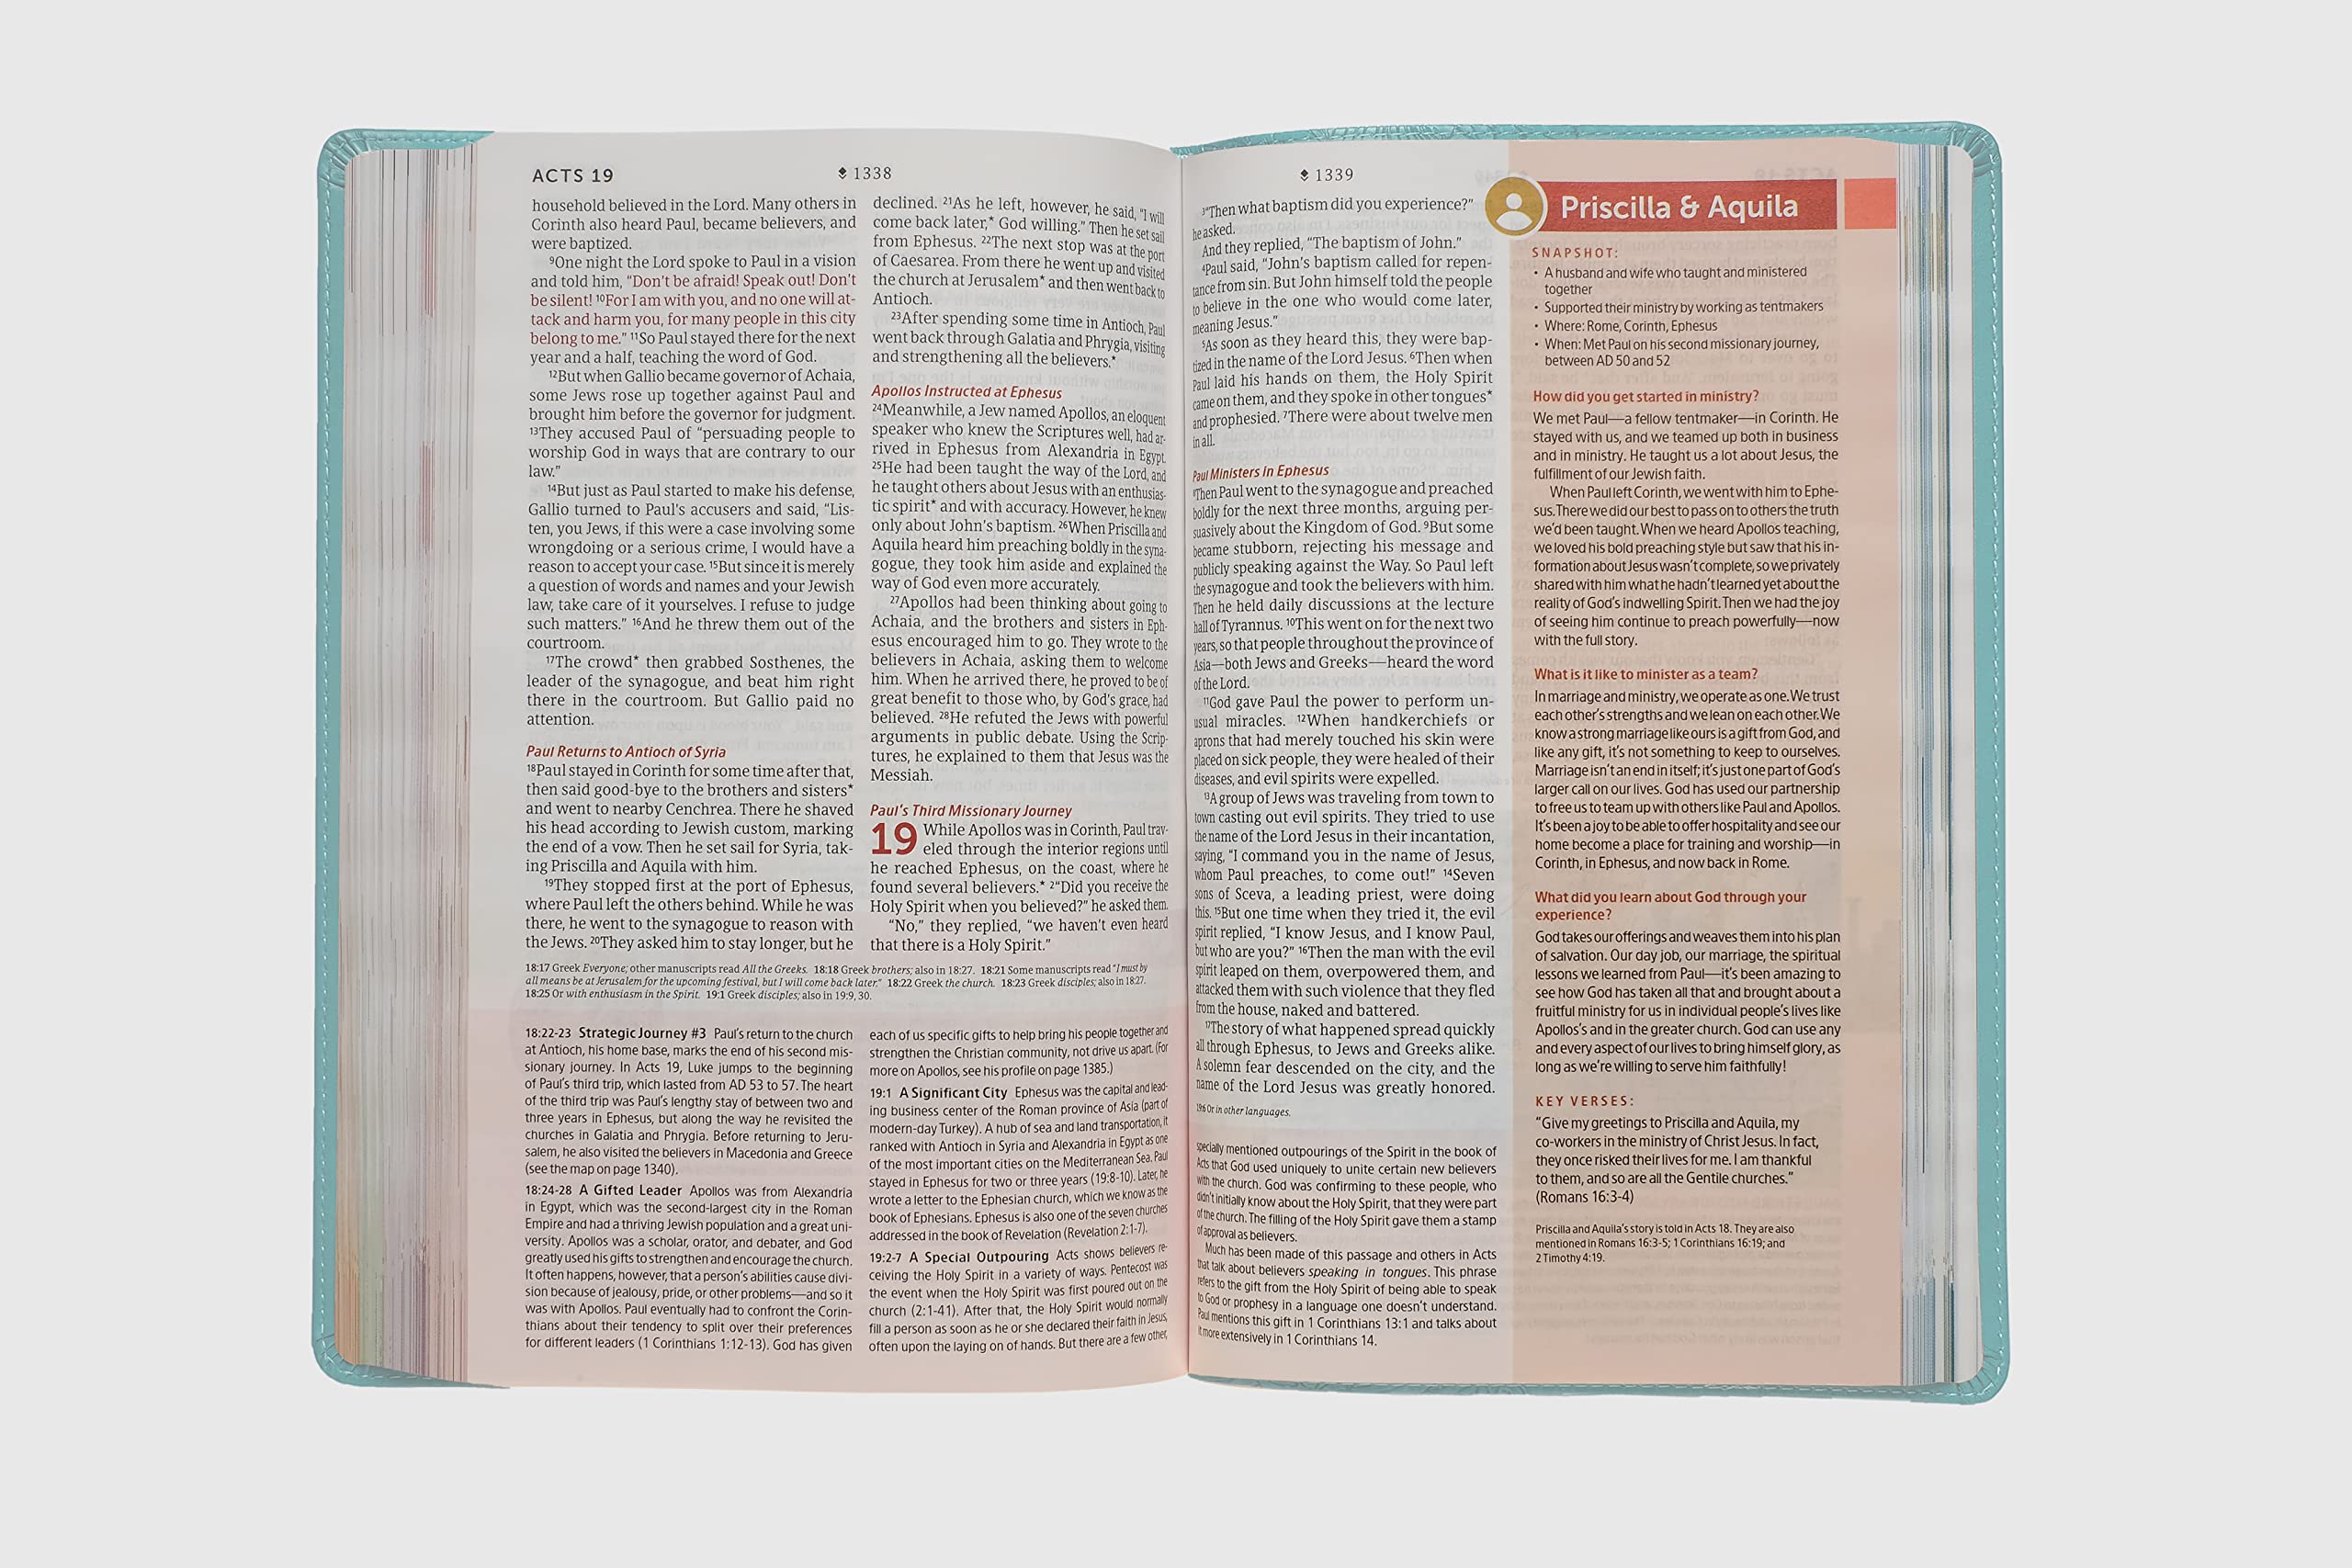 NLT Student Life Application Study Bible, Filament-Enabled Edition (LeatherLike, Teal Blue Striped, Red Letter)